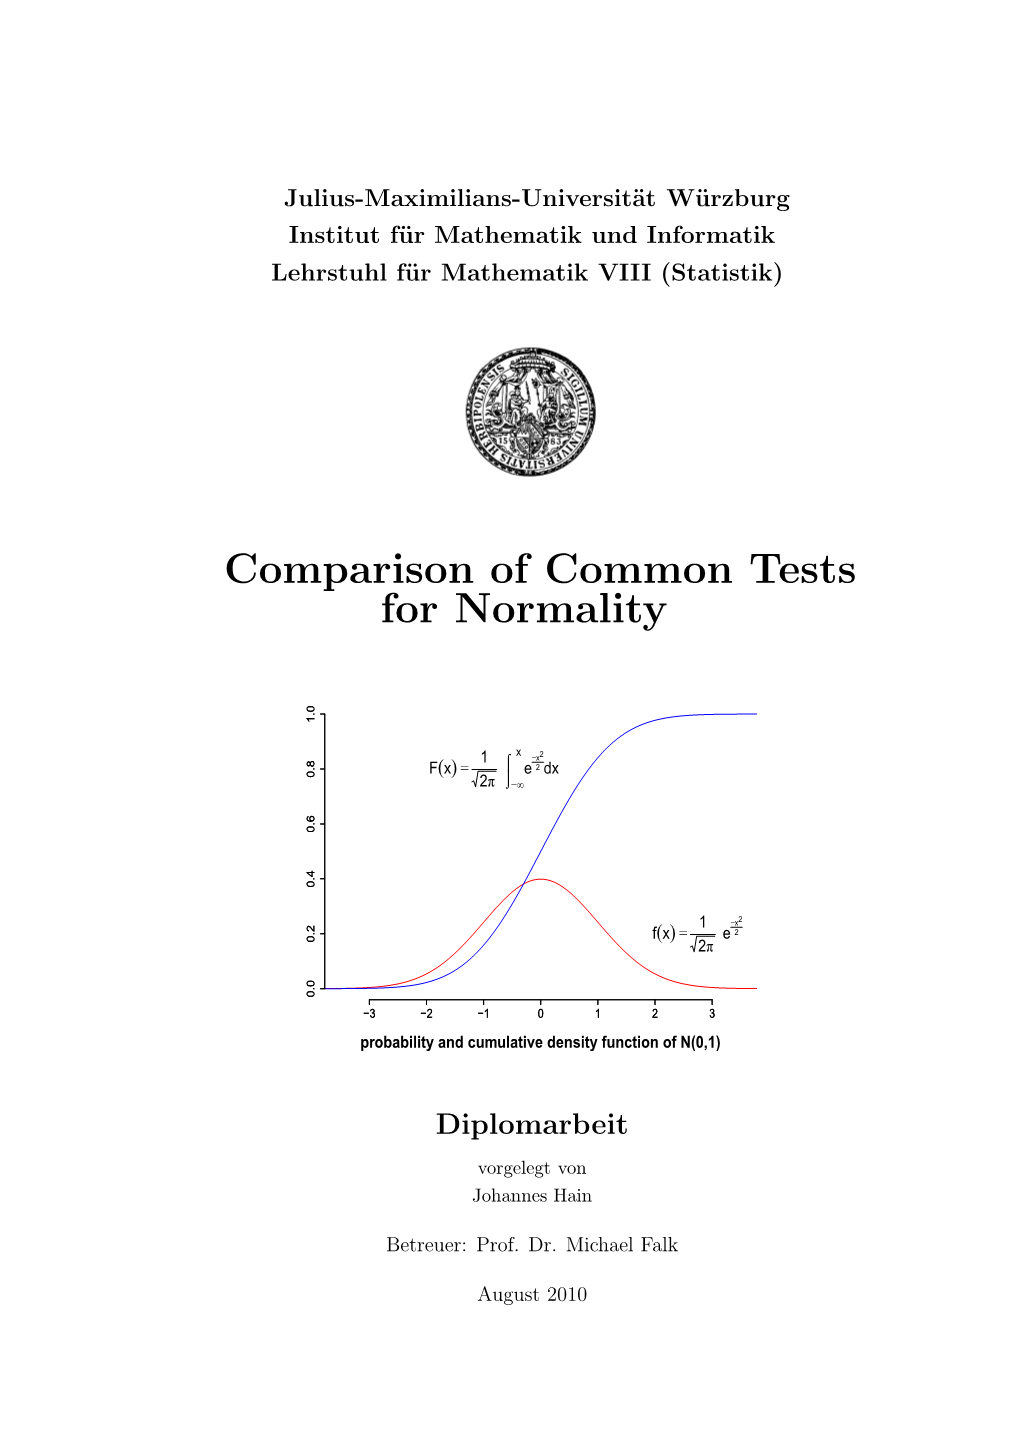 Comparison of Common Tests for Normality